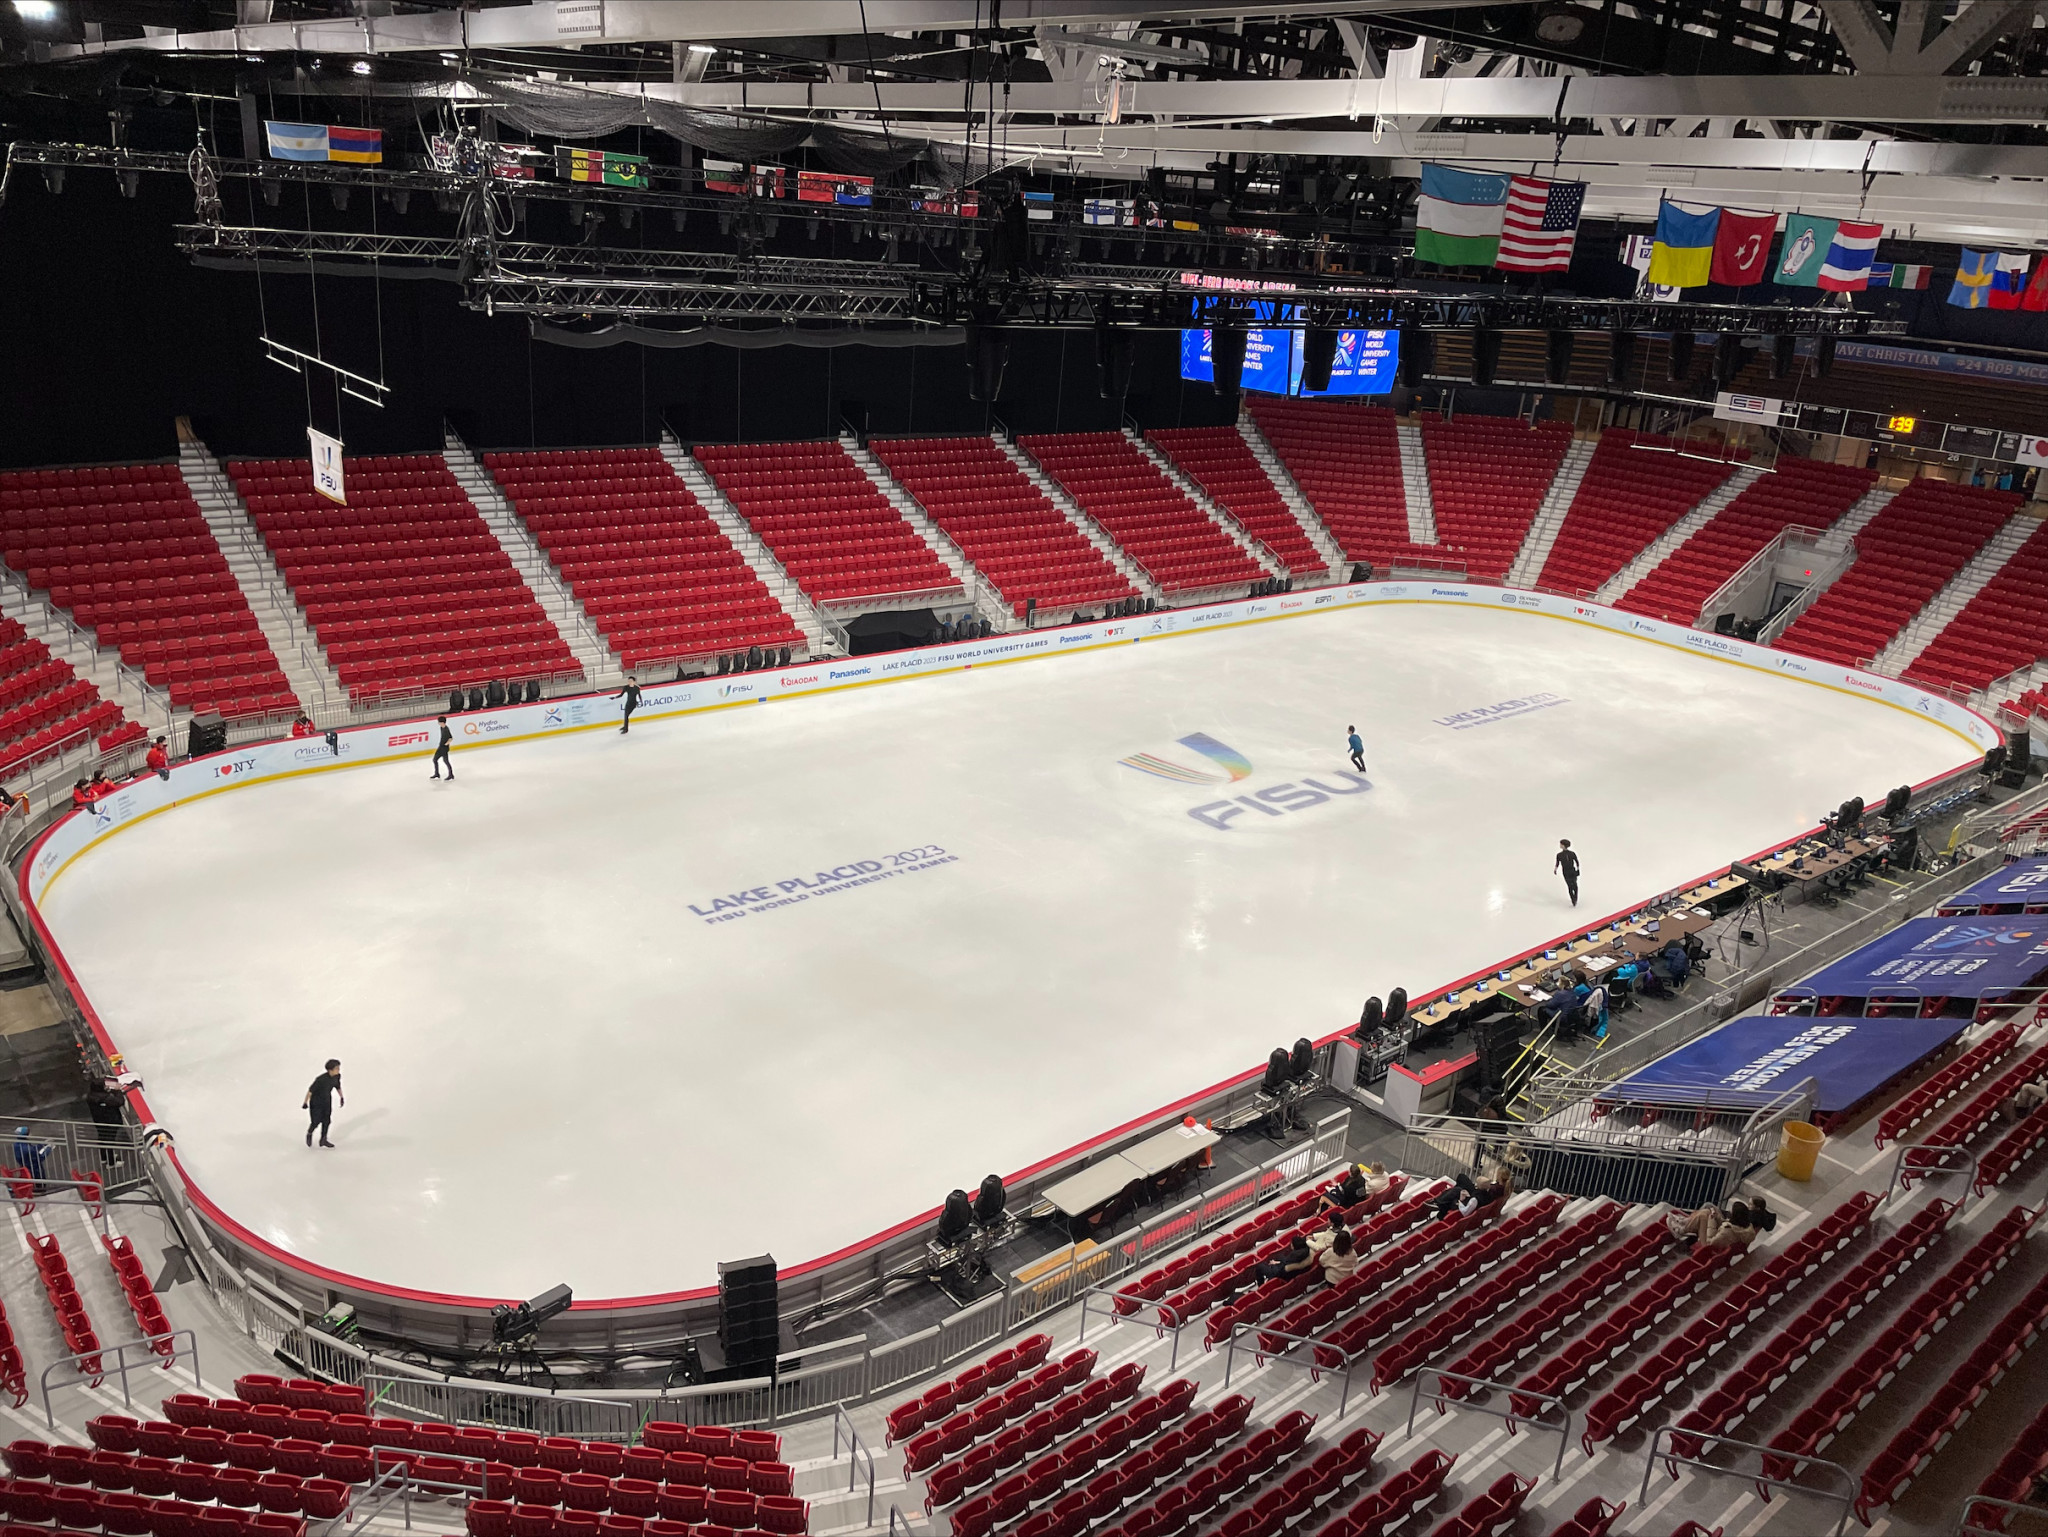 The Herb Brooks Arena in the Olympic Center is set to host the Lake Placid 2023 Opening Ceremony ©ITG